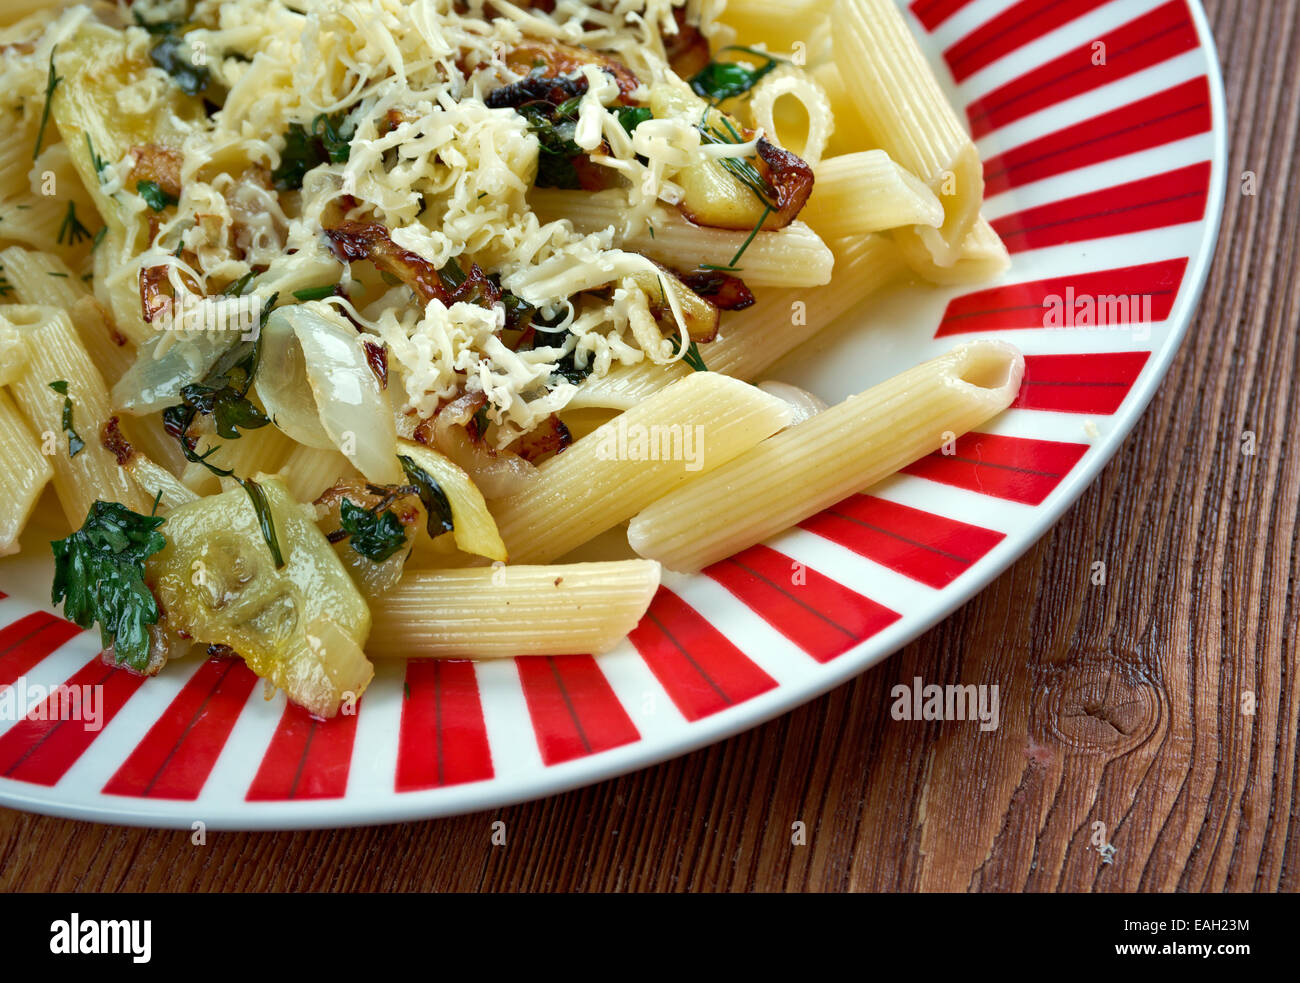 Mezze penne alla formaggella - Italian pasta penne with goat cheese and vegetables Stock Photo